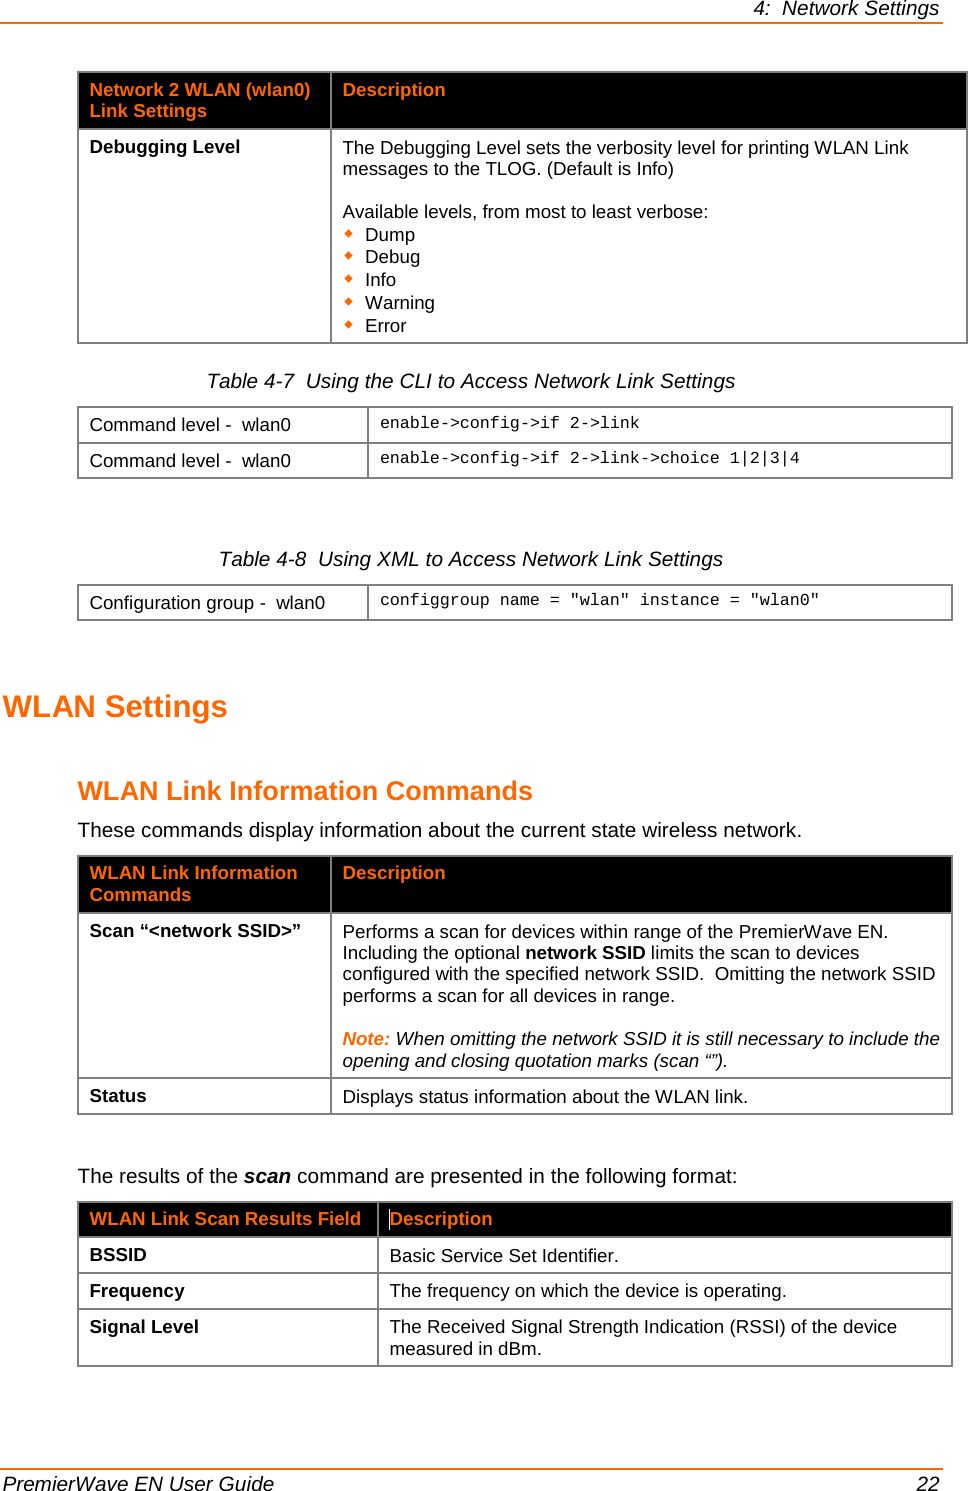 4:  Network Settings  PremierWave EN User Guide    22 Network 2 WLAN (wlan0) Link Settings Description Debugging Level The Debugging Level sets the verbosity level for printing WLAN Link messages to the TLOG. (Default is Info)  Available levels, from most to least verbose:  Dump  Debug  Info  Warning  Error Table 4-7  Using the CLI to Access Network Link Settings Command level -  wlan0 enable-&gt;config-&gt;if 2-&gt;link Command level -  wlan0 enable-&gt;config-&gt;if 2-&gt;link-&gt;choice 1|2|3|4  Table 4-8  Using XML to Access Network Link Settings Configuration group -  wlan0 configgroup name = &quot;wlan&quot; instance = &quot;wlan0&quot;    WLAN Settings  WLAN Link Information Commands These commands display information about the current state wireless network. WLAN Link Information Commands Description Scan “&lt;network SSID&gt;” Performs a scan for devices within range of the PremierWave EN. Including the optional network SSID limits the scan to devices configured with the specified network SSID.  Omitting the network SSID performs a scan for all devices in range.   Note: When omitting the network SSID it is still necessary to include the opening and closing quotation marks (scan “”). Status Displays status information about the WLAN link.   The results of the scan command are presented in the following format: WLAN Link Scan Results Field Description BSSID Basic Service Set Identifier. Frequency The frequency on which the device is operating. Signal Level The Received Signal Strength Indication (RSSI) of the device measured in dBm. 